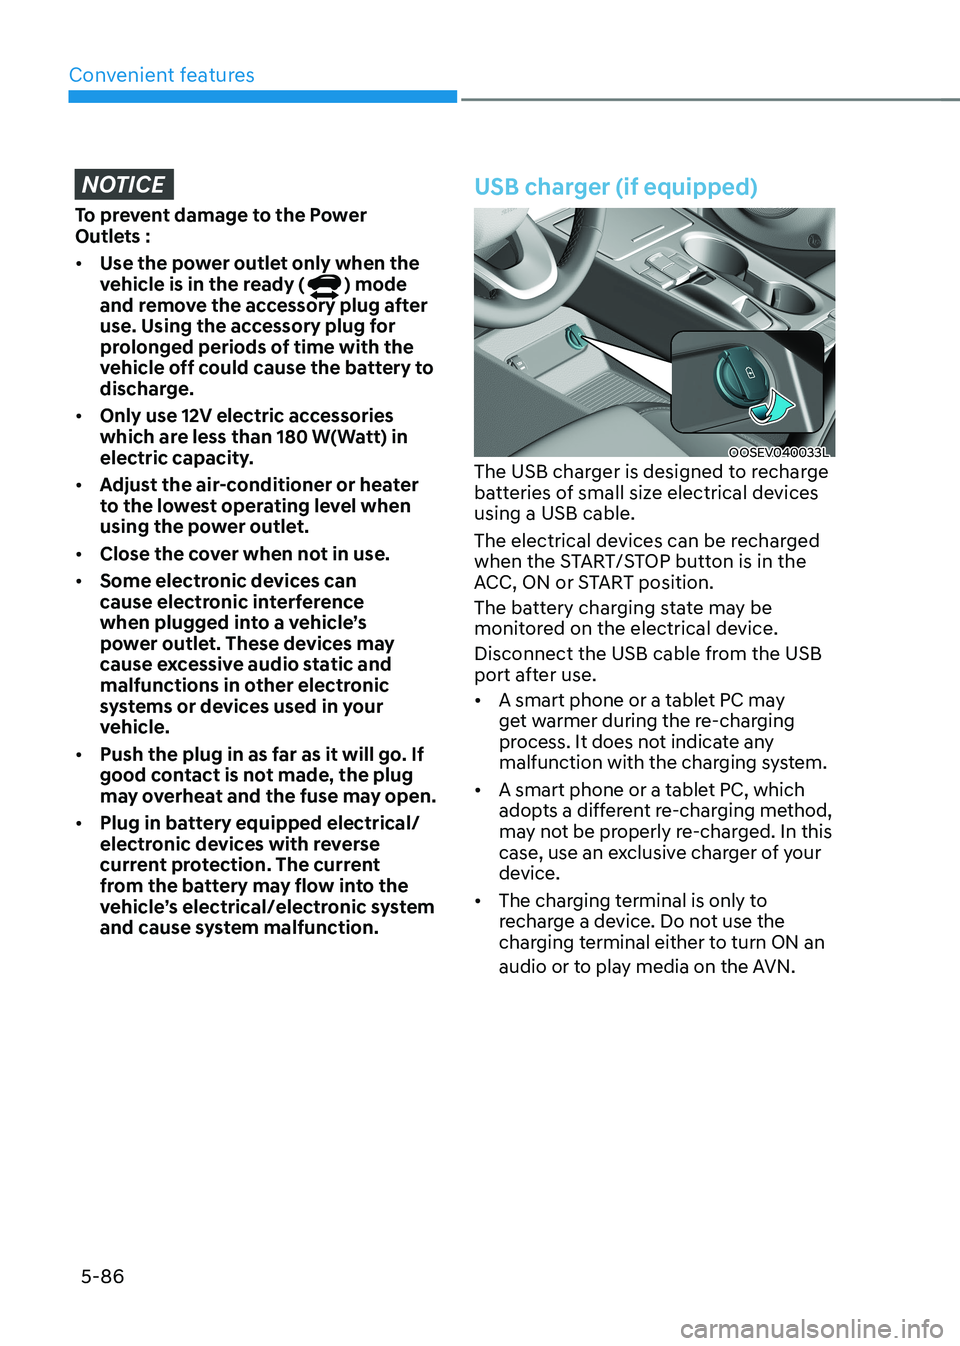 HYUNDAI KONA EV 2023  Owners Manual Convenient features
5-86
NOTICE
To prevent damage to the Power  
Outlets : •	Use the power outlet only when the  
vehicle is in the ready (
) mode 
and remove the accessory plug after  
use. Using t